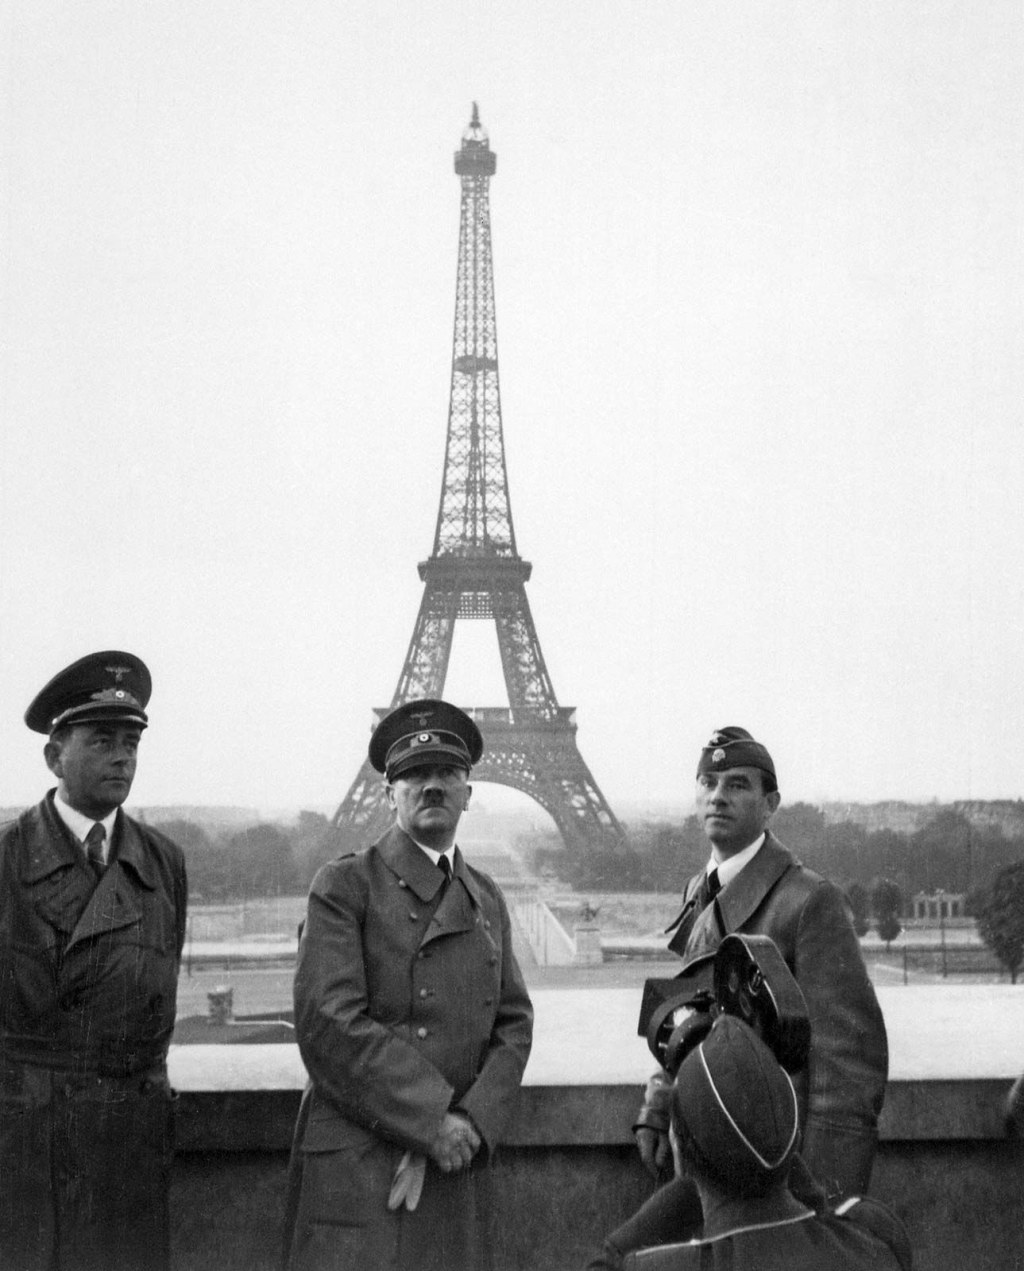 france politics during ww2 - Battle of France  History, Summary, Maps, & Combatants  Britannica